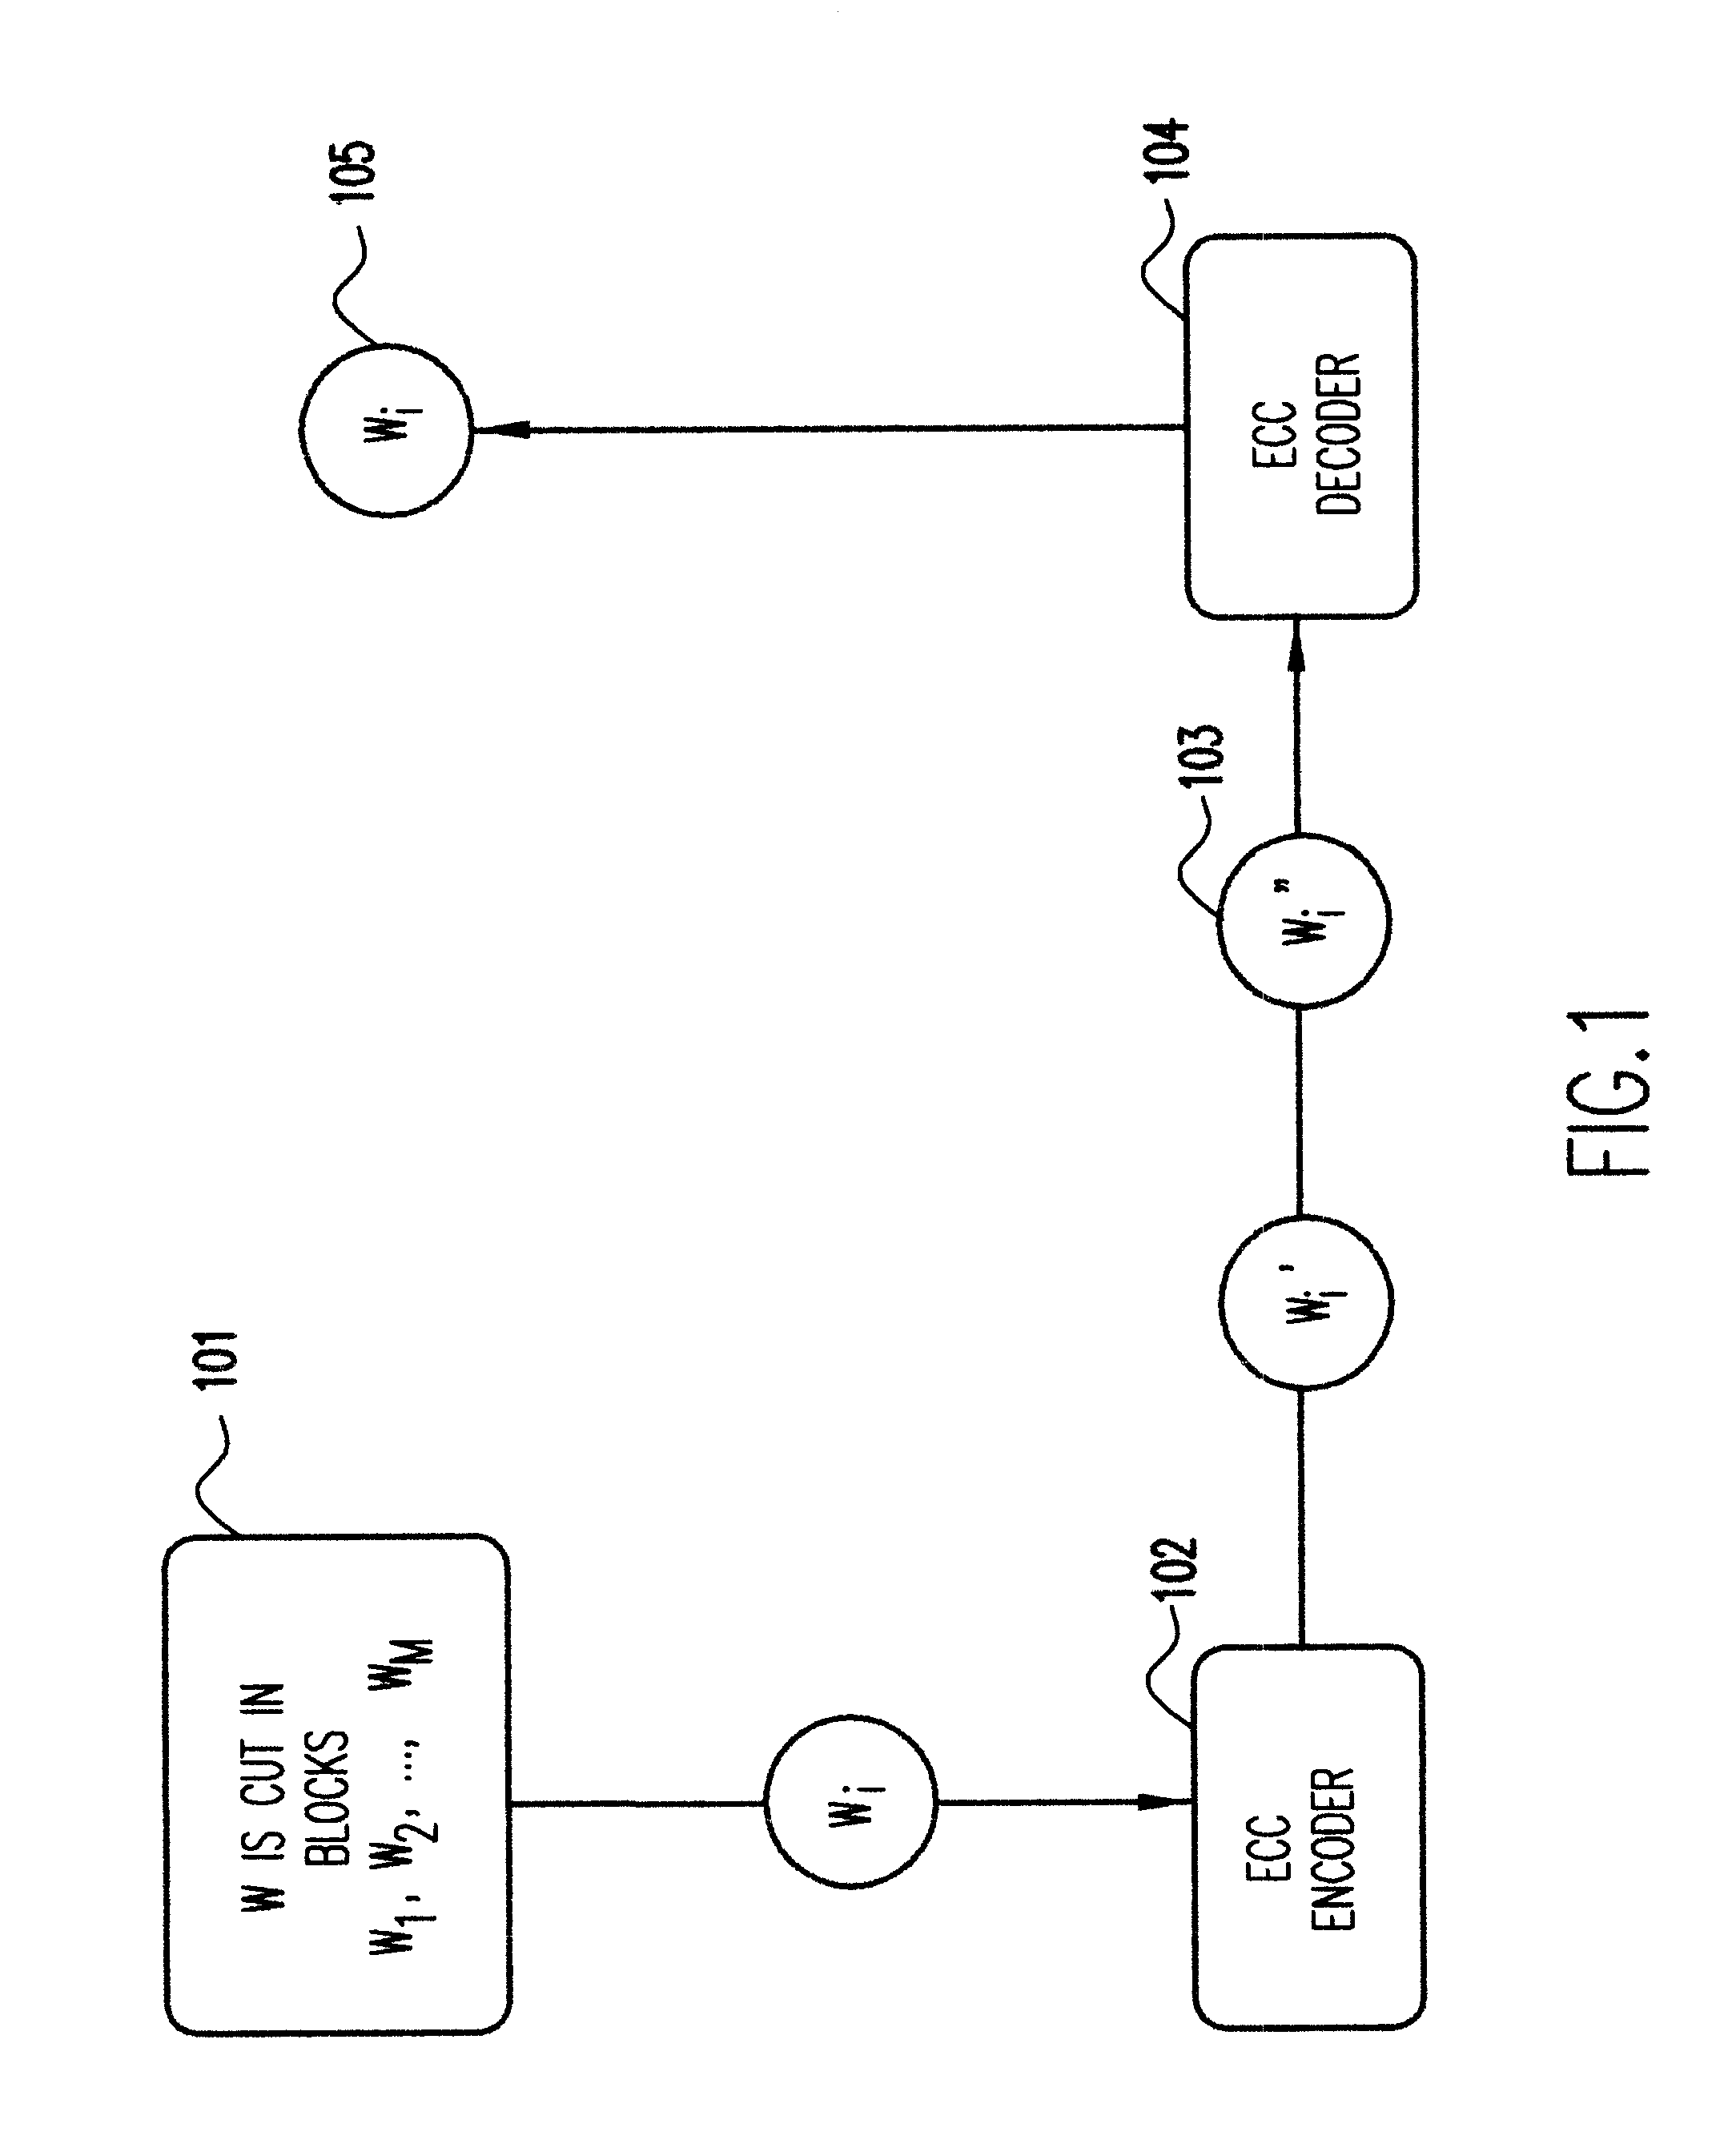 Method and apparatus for watermarking with no perceptible trace